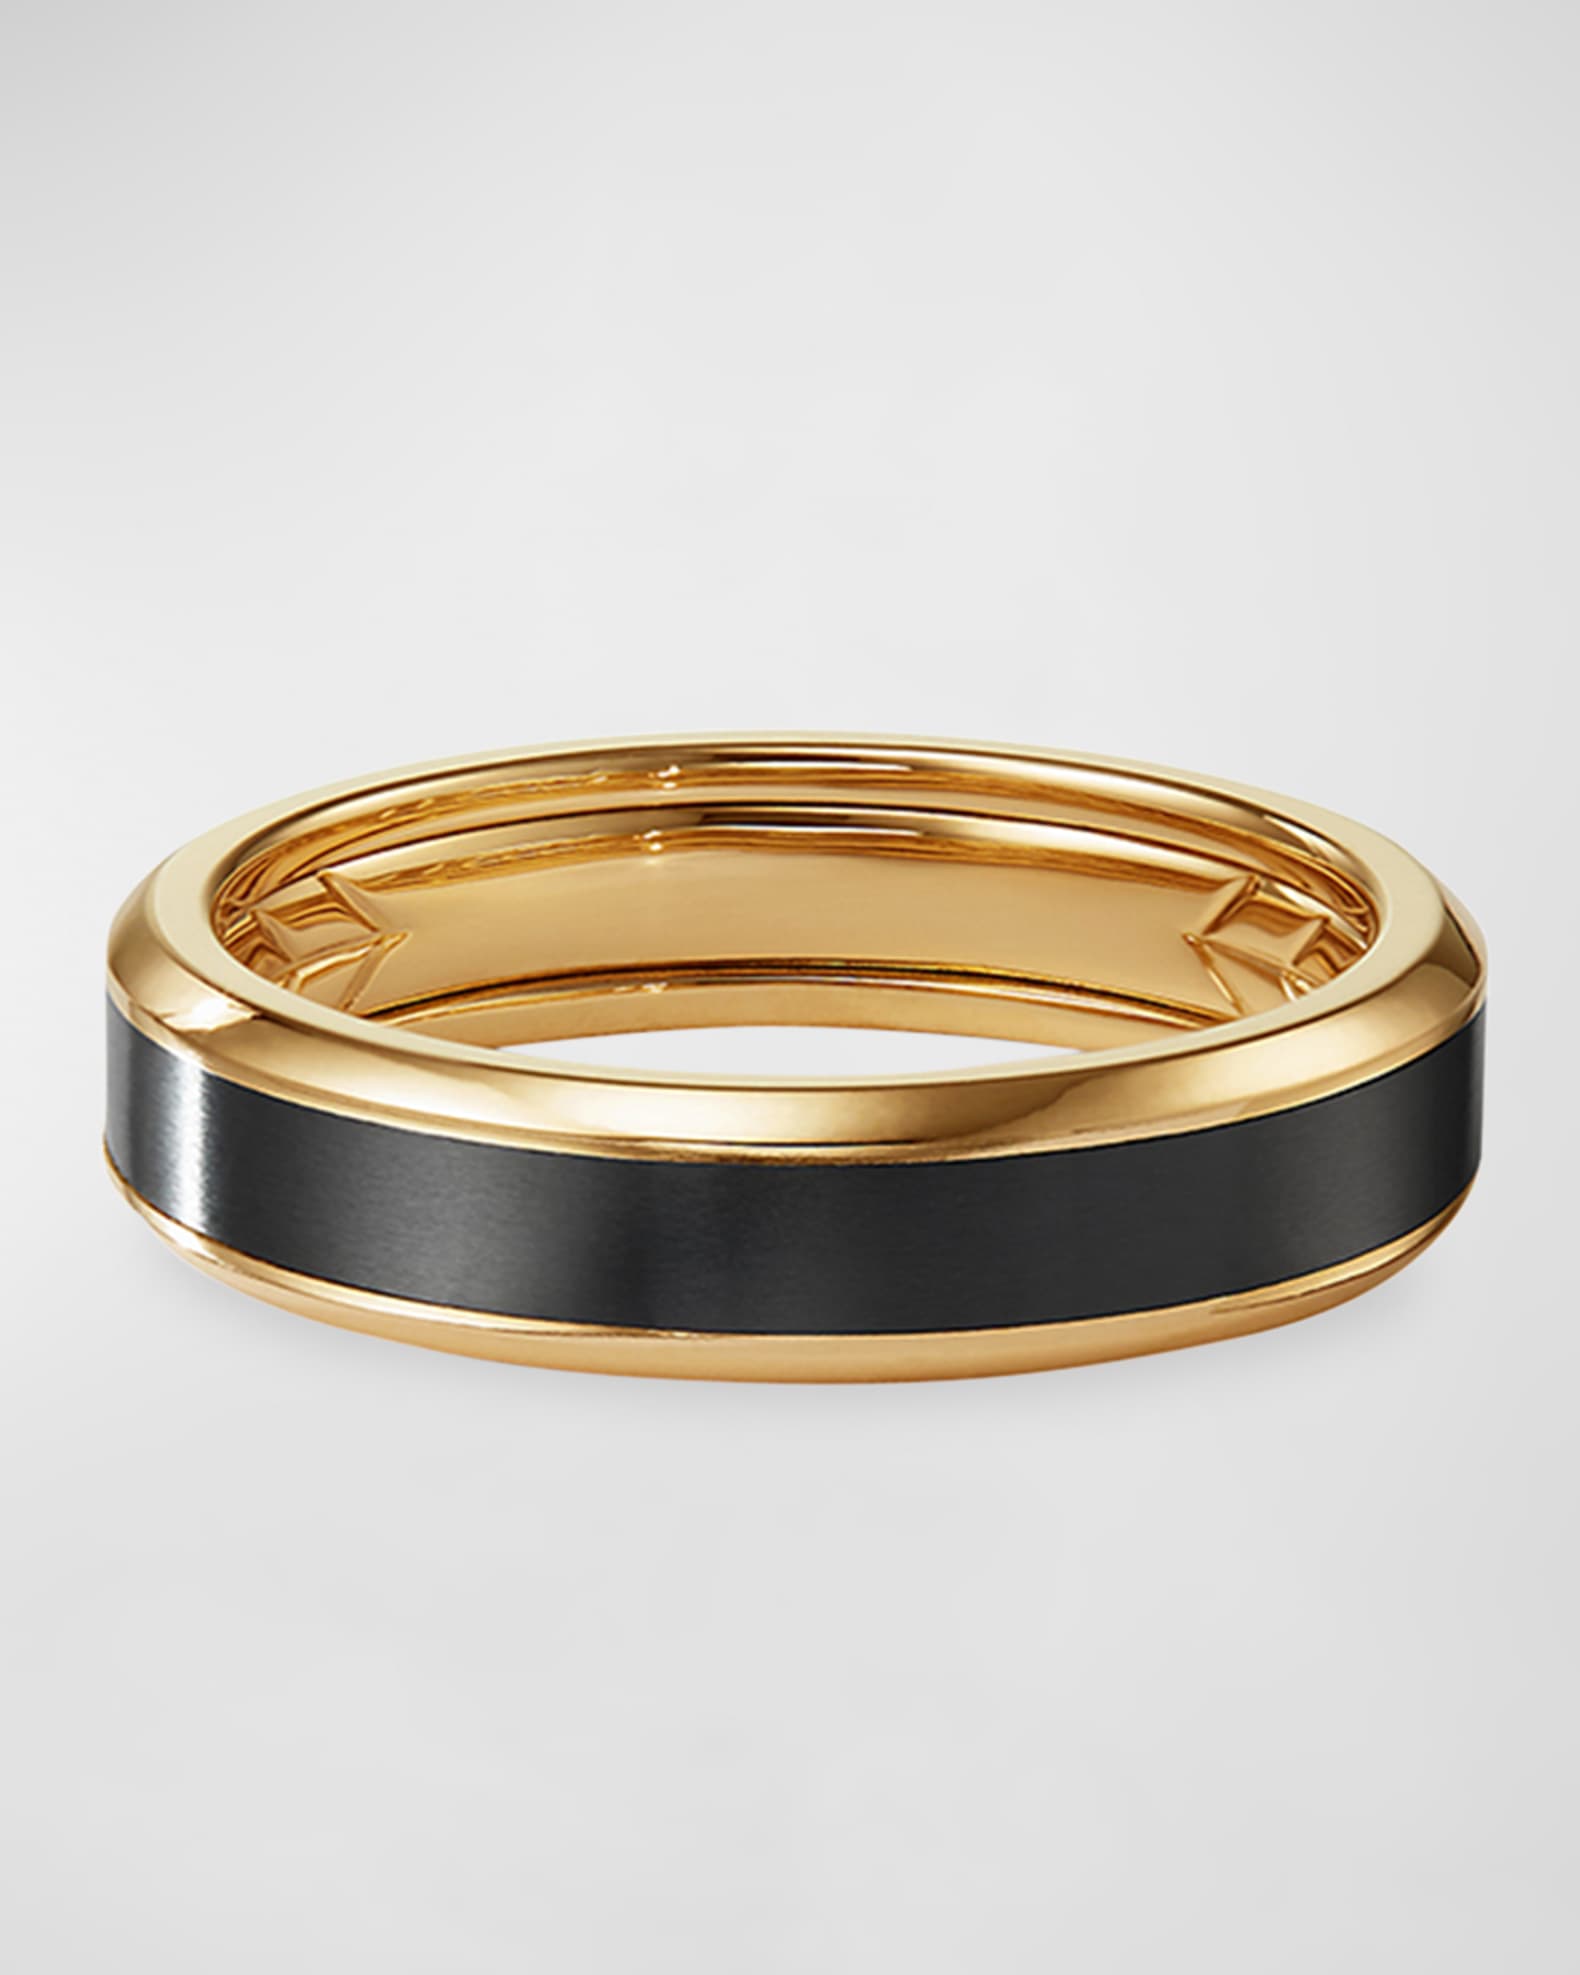 Lv Ring.  Fisher's beauty line